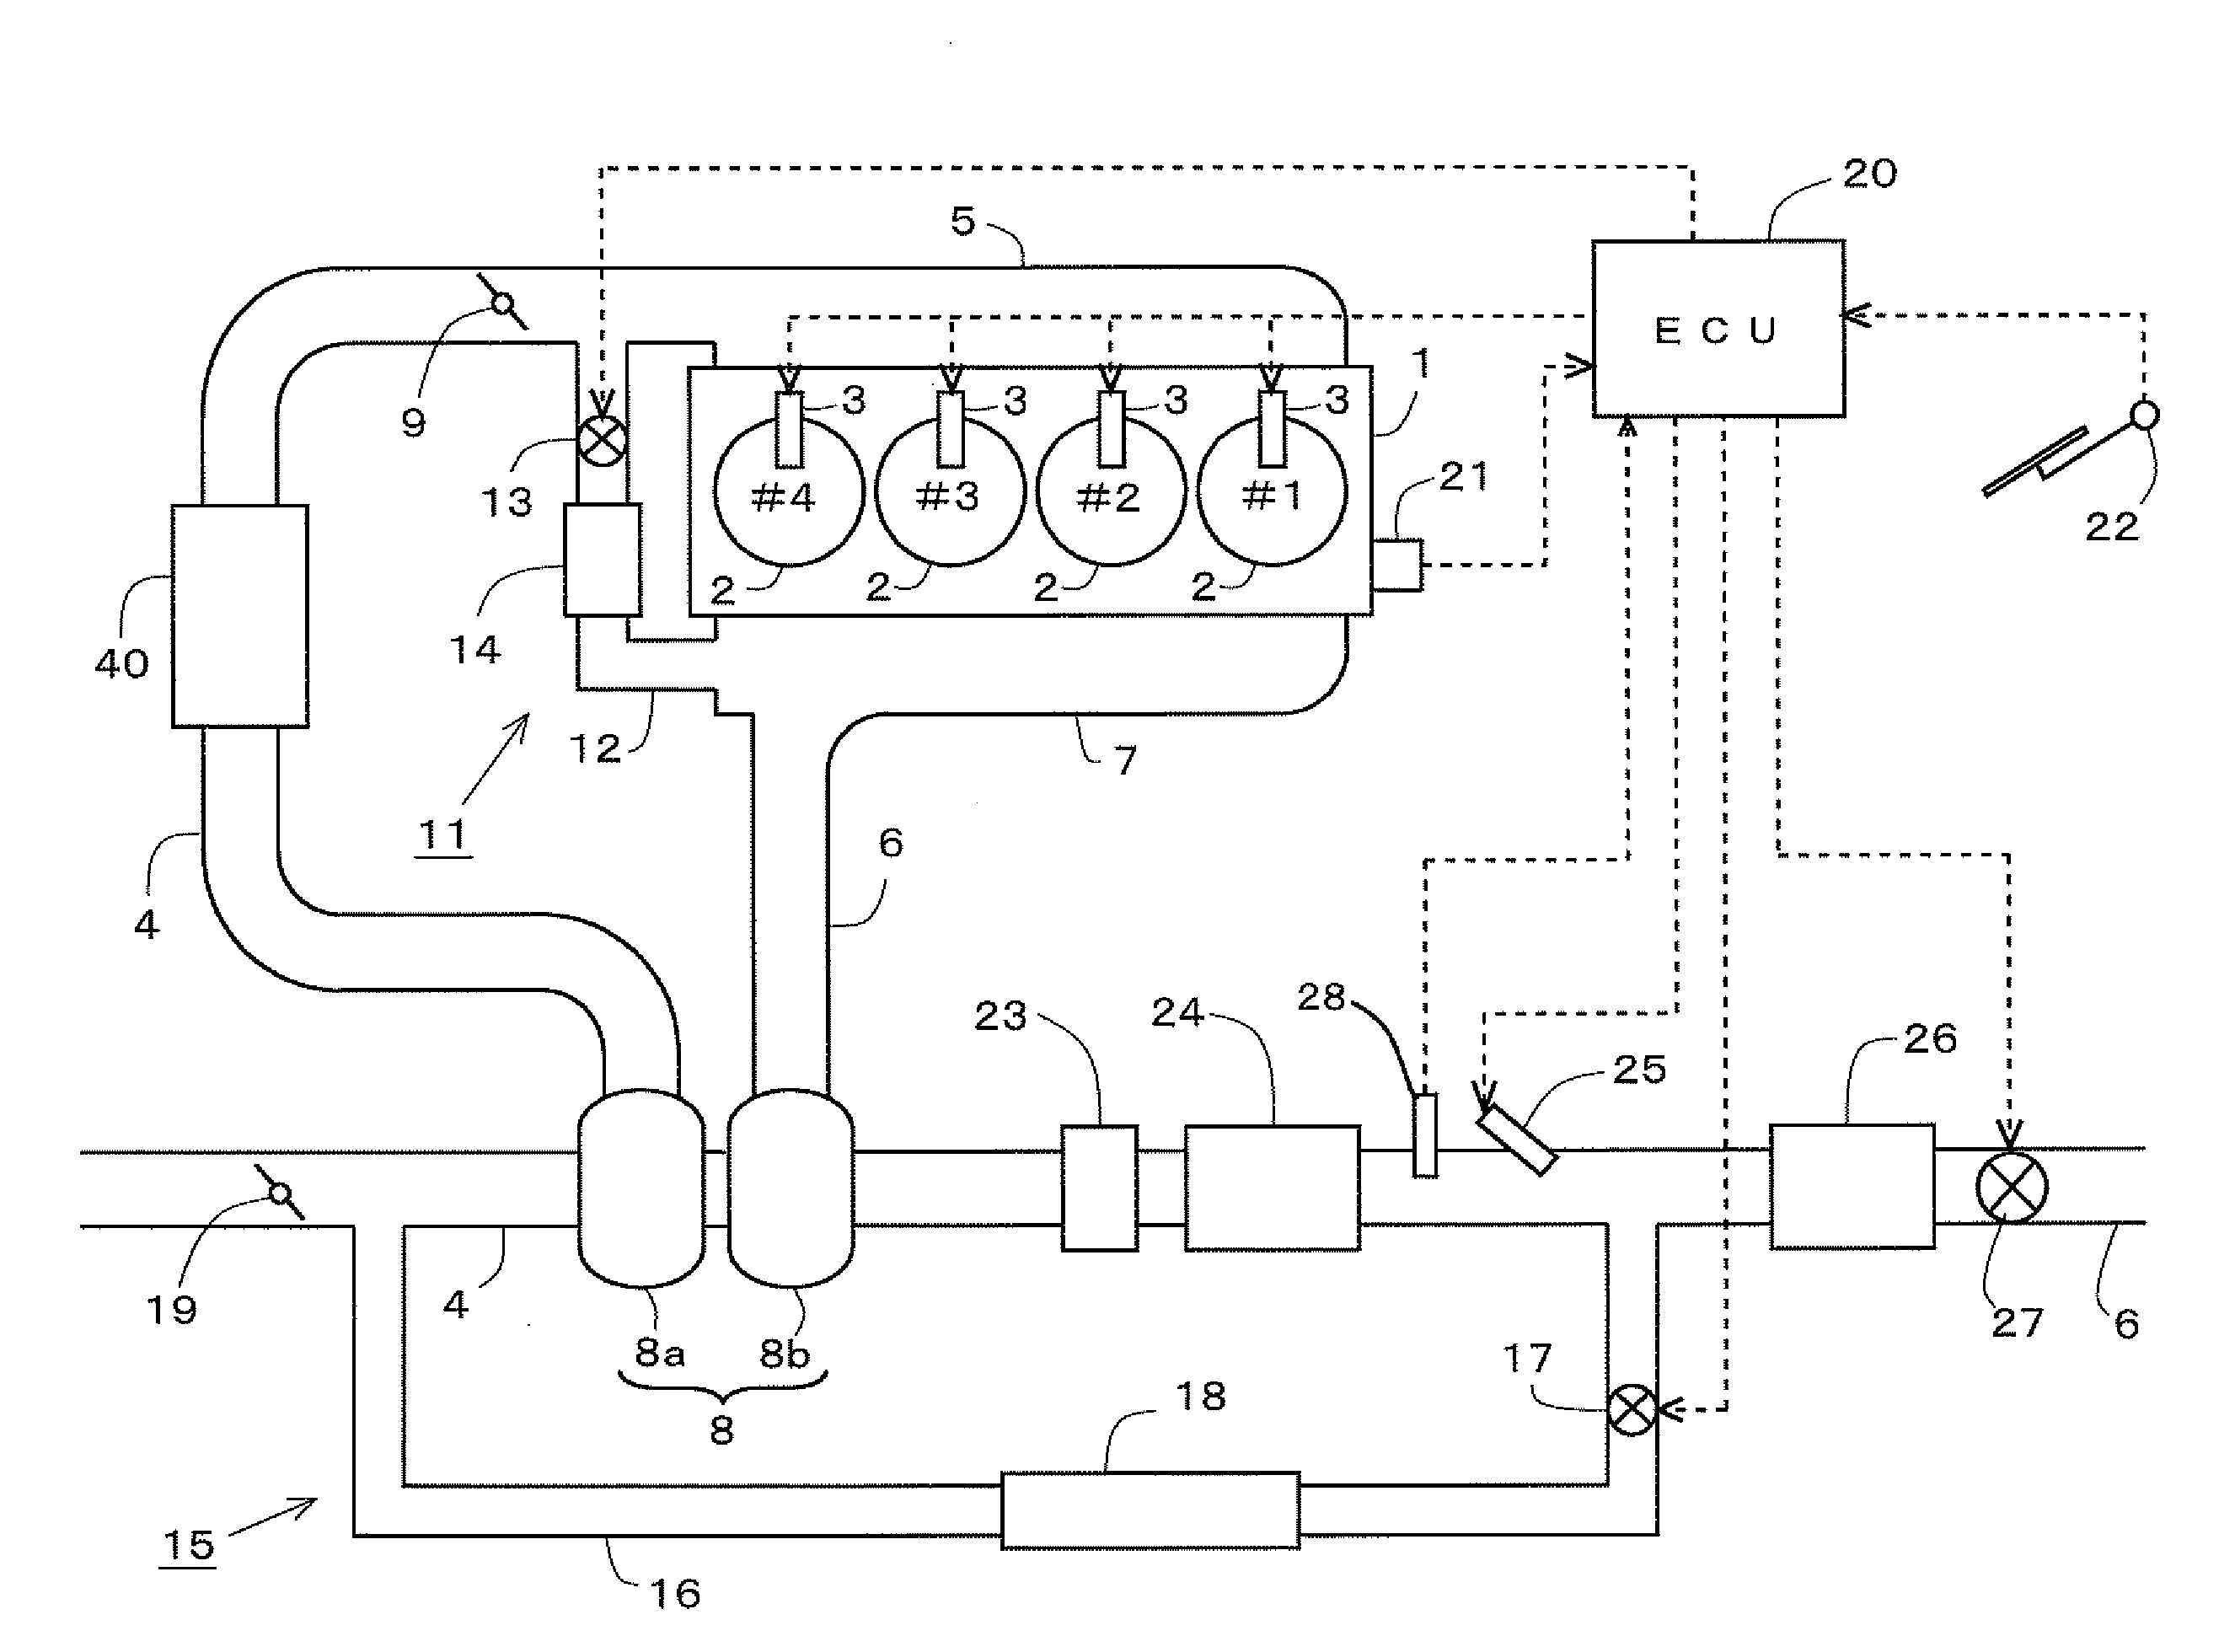 Exhaust gas purification system for an internal combustion engine